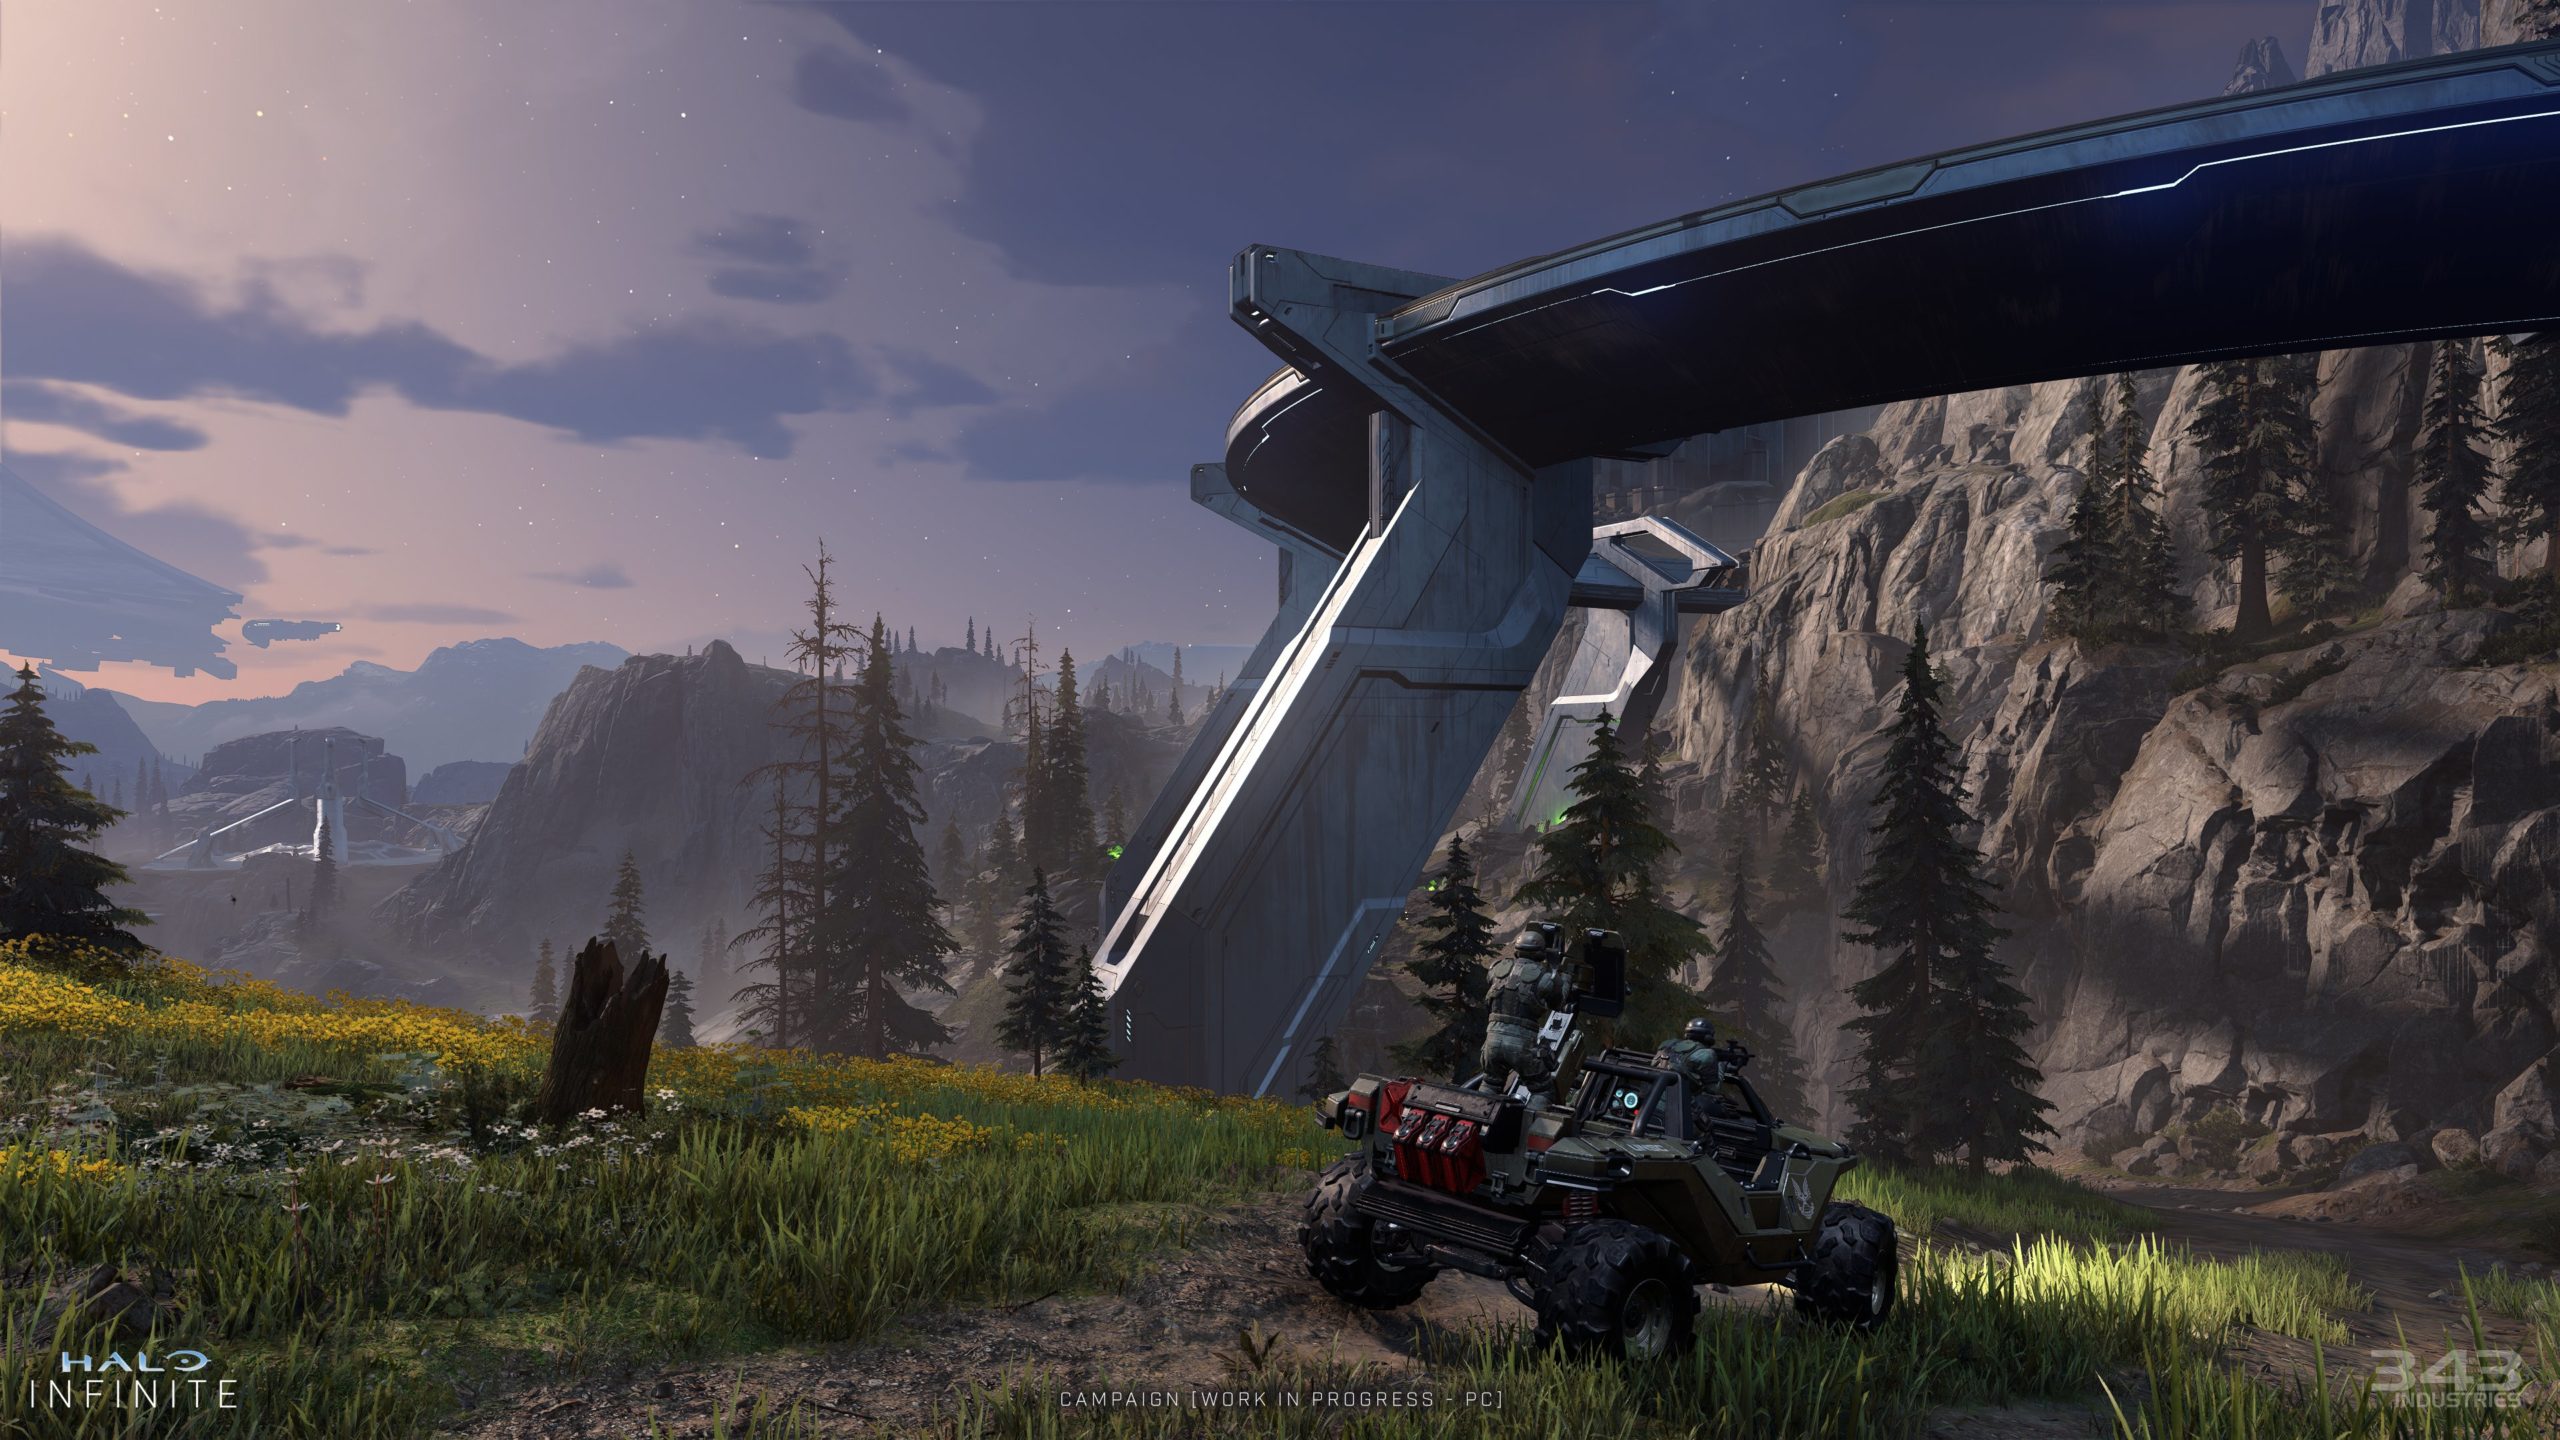 Halo Infinite multiplayer has cross-platform support for PC and Xbox -  Polygon